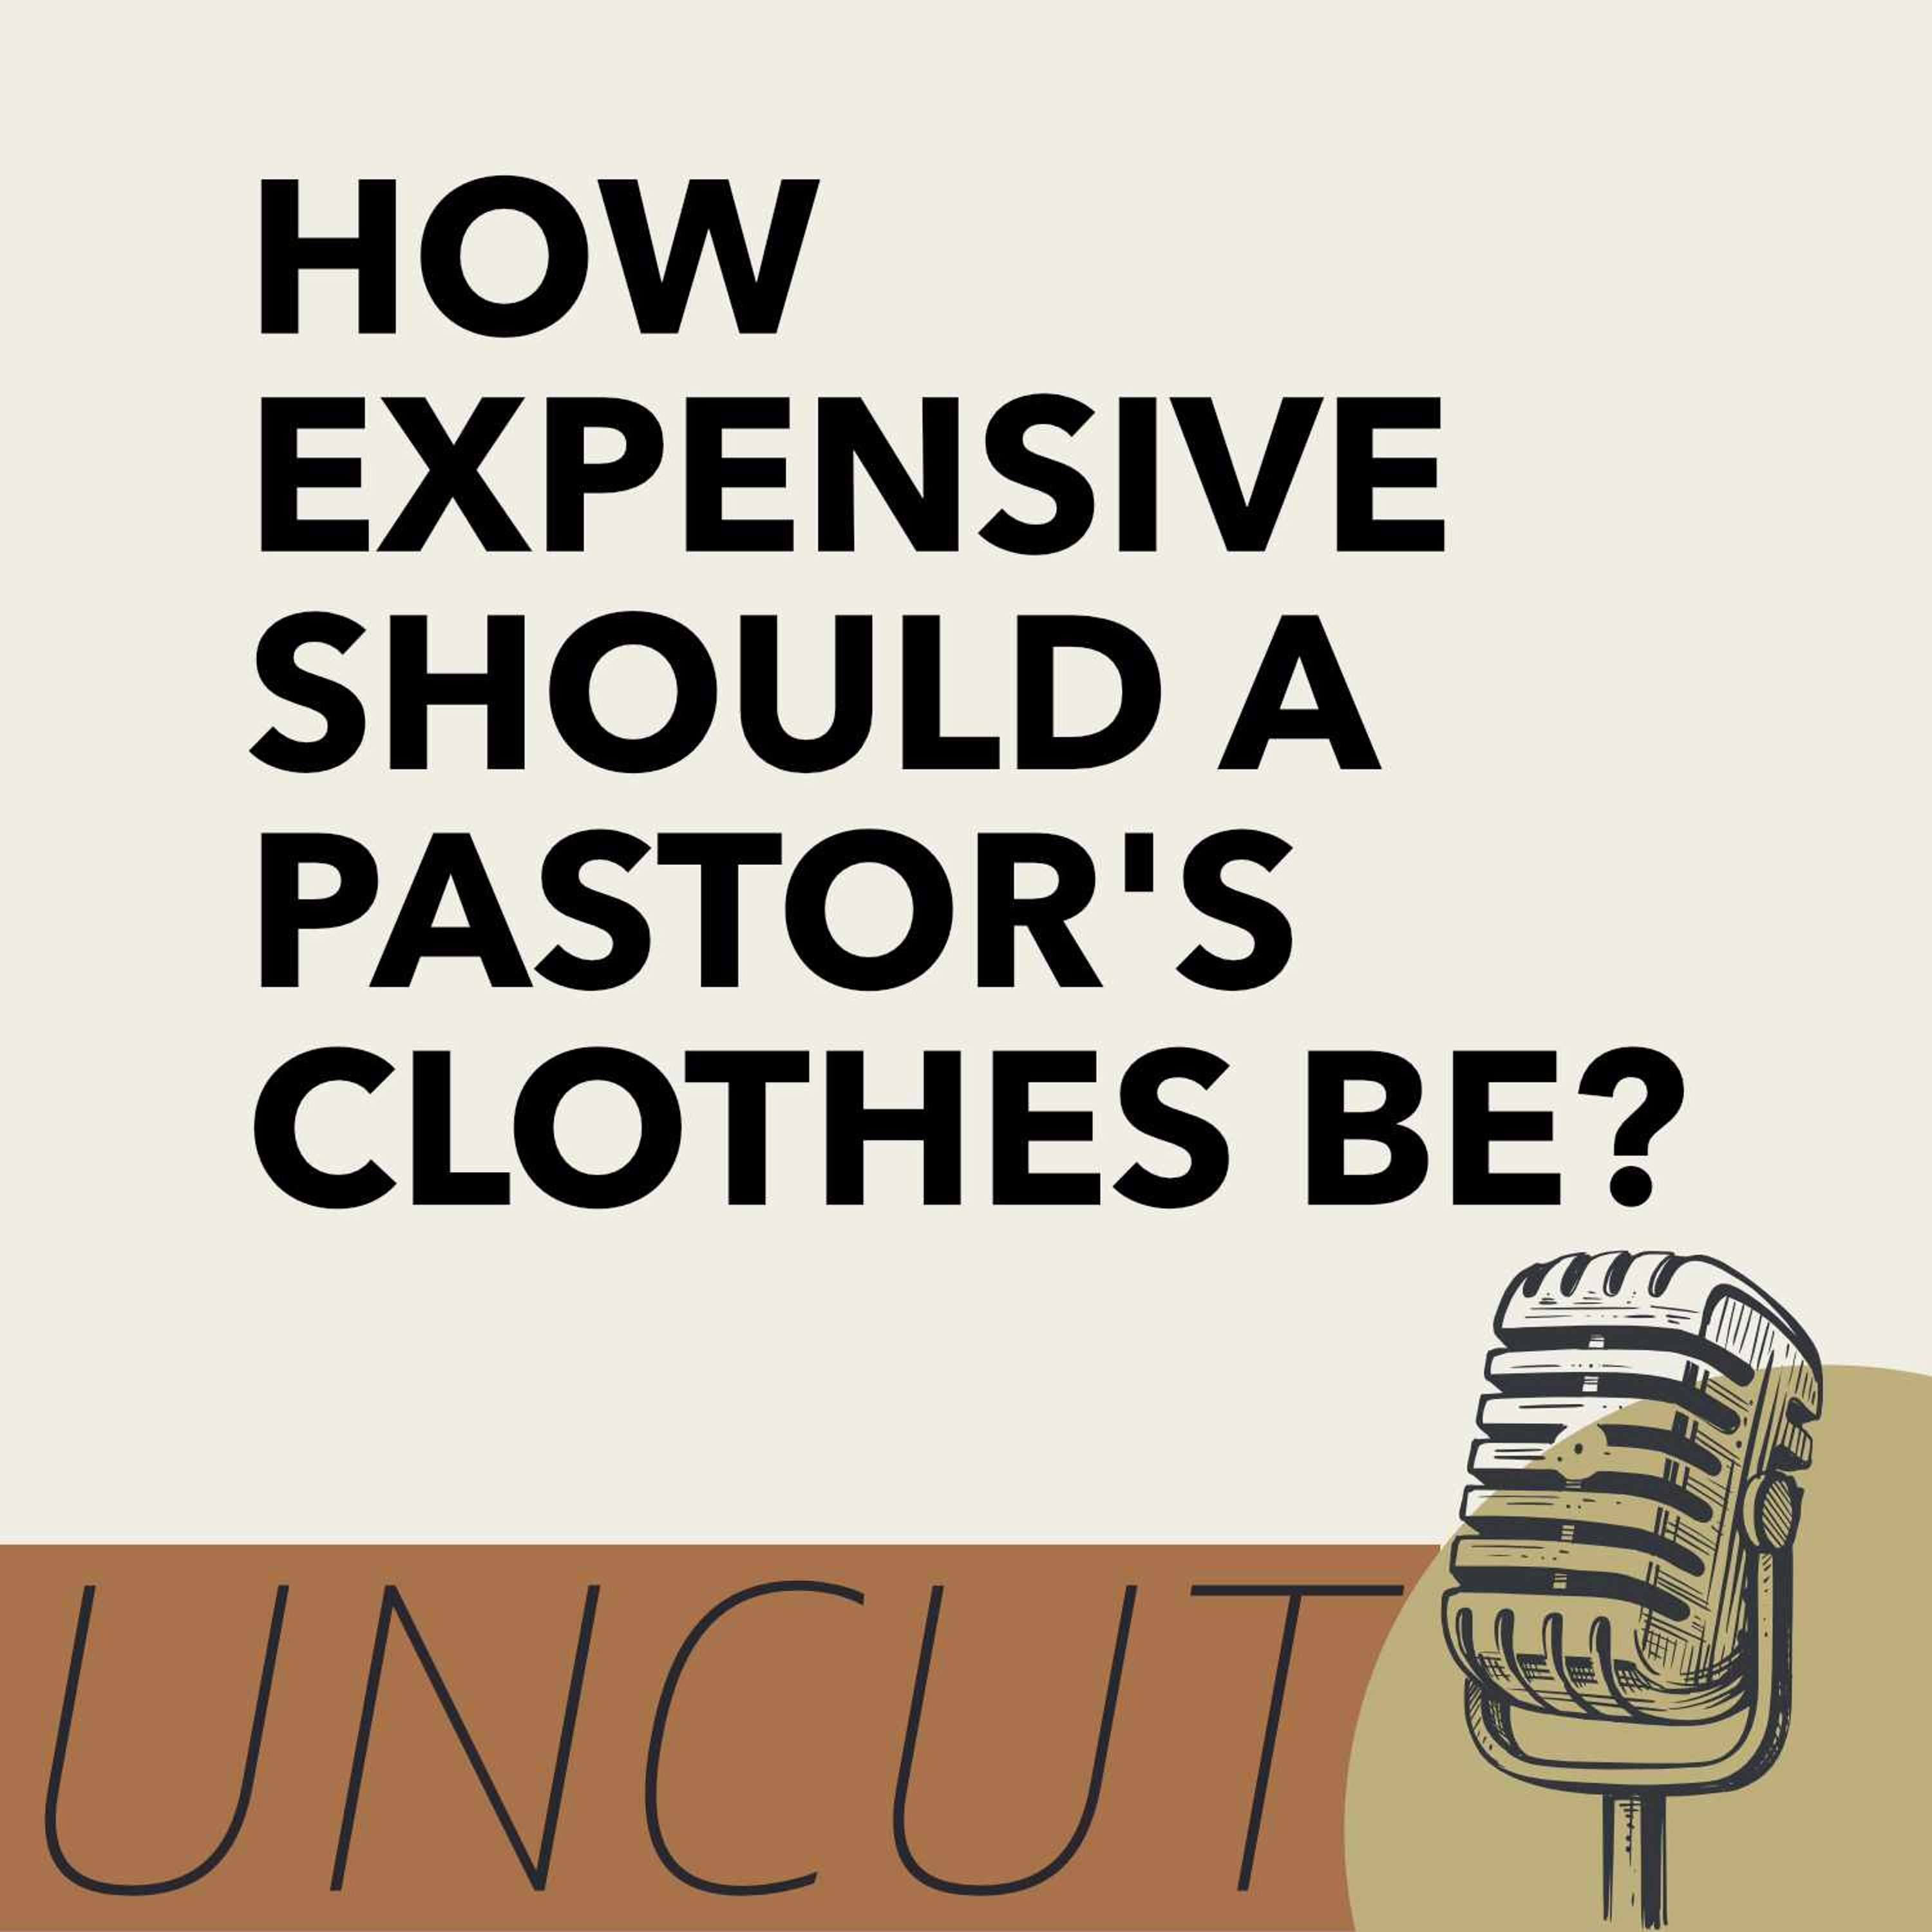 Preachers & Fashion: How much should a pastor spend on clothes?